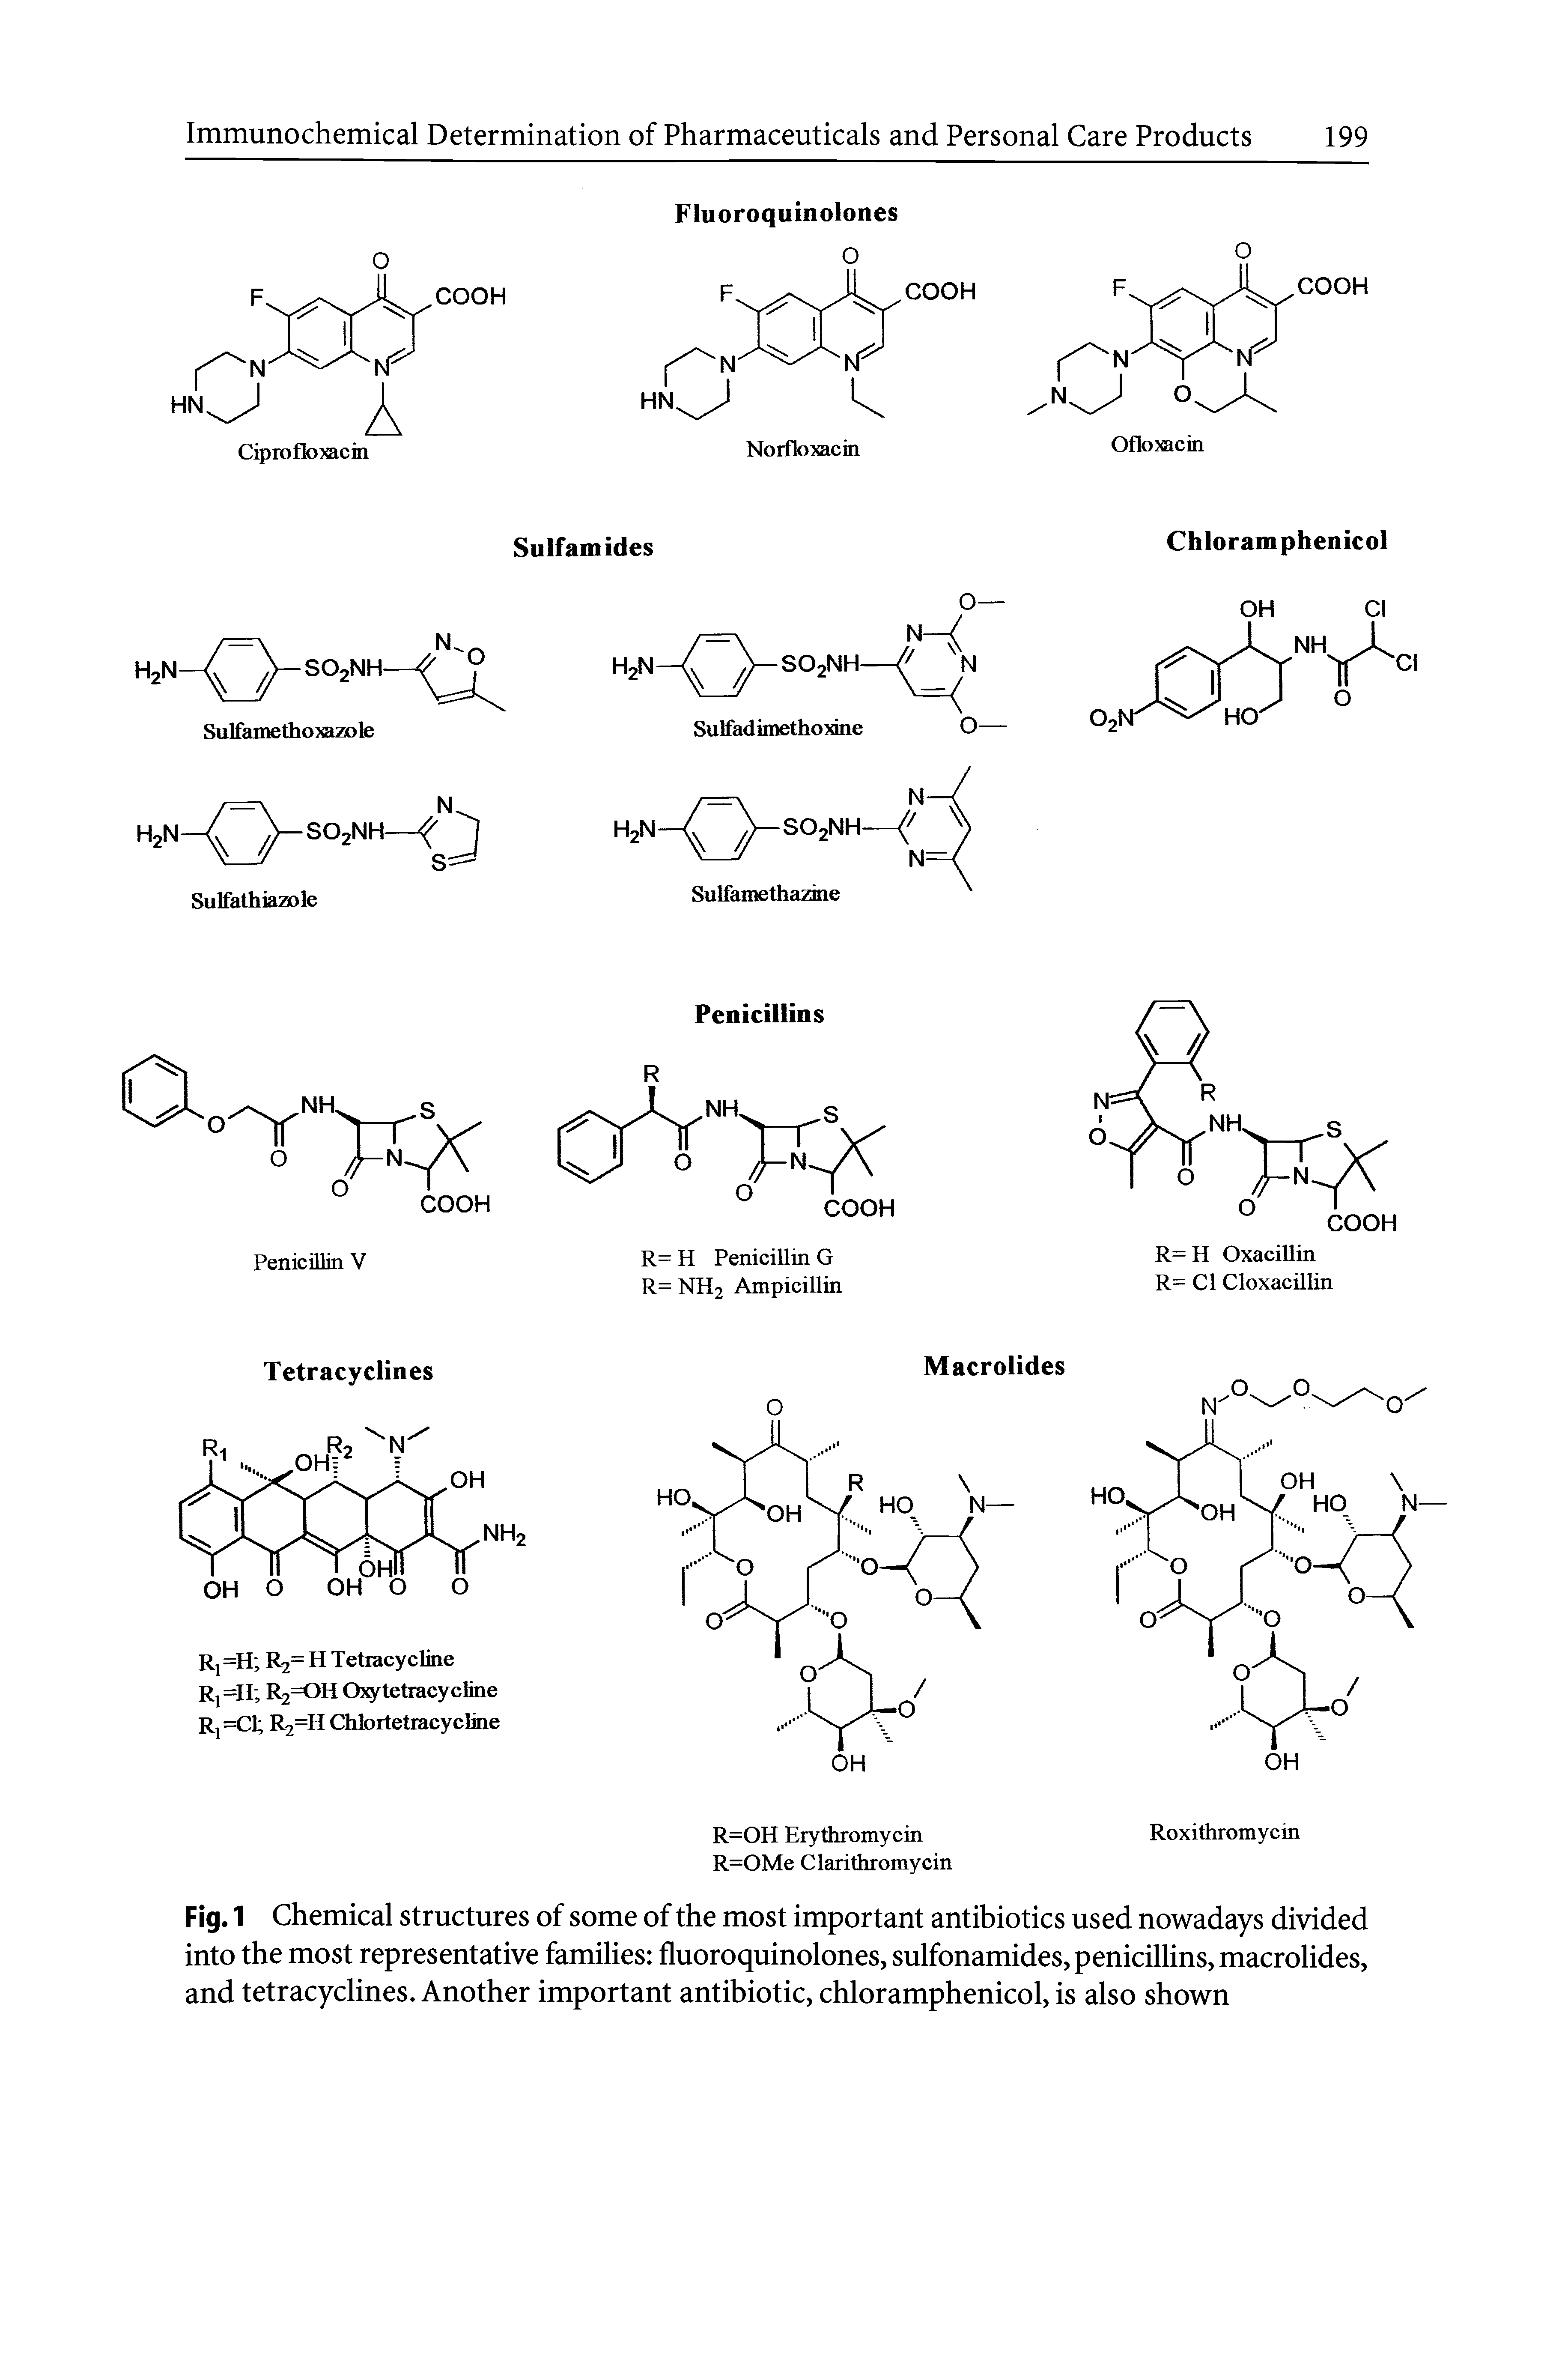 Fig. 1 Chemical structures of some of the most important antibiotics used nowadays divided into the most representative families fluoroquinolones, sulfonamides, penicillins, macrolides, and tetracyclines. Another important antibiotic, chloramphenicol, is also shown...